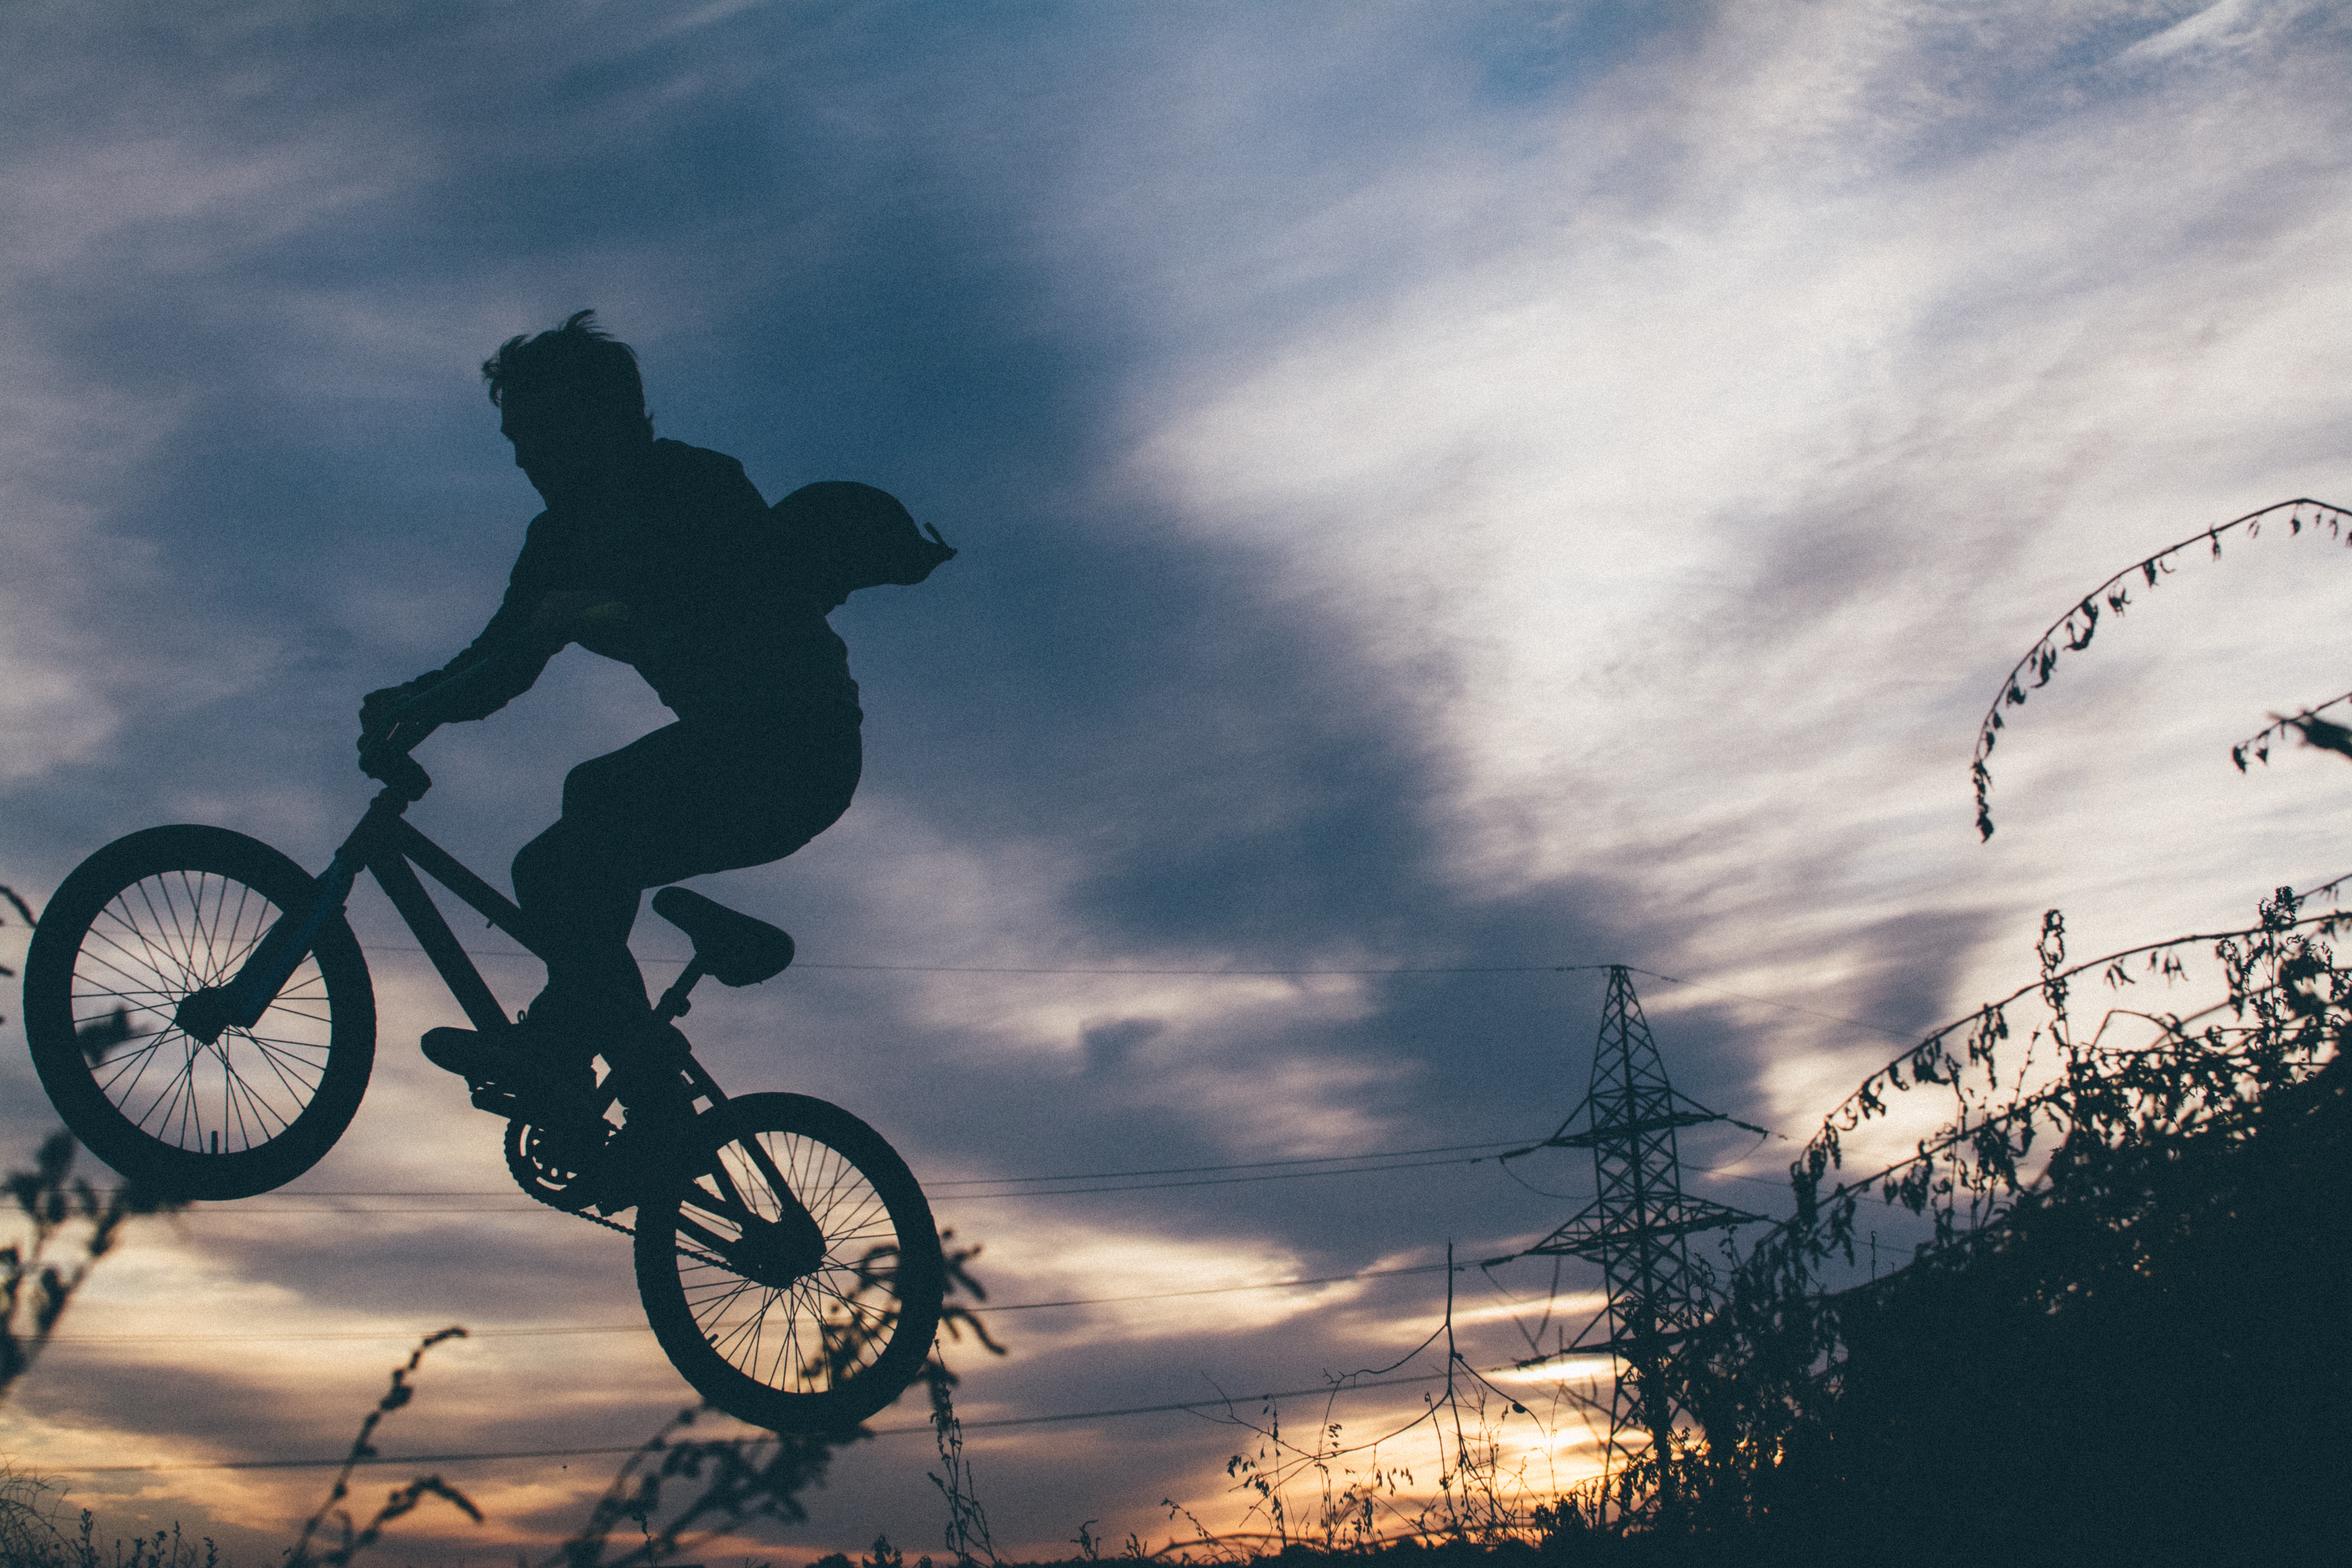 Bike, bmx, sky, silhouette and person